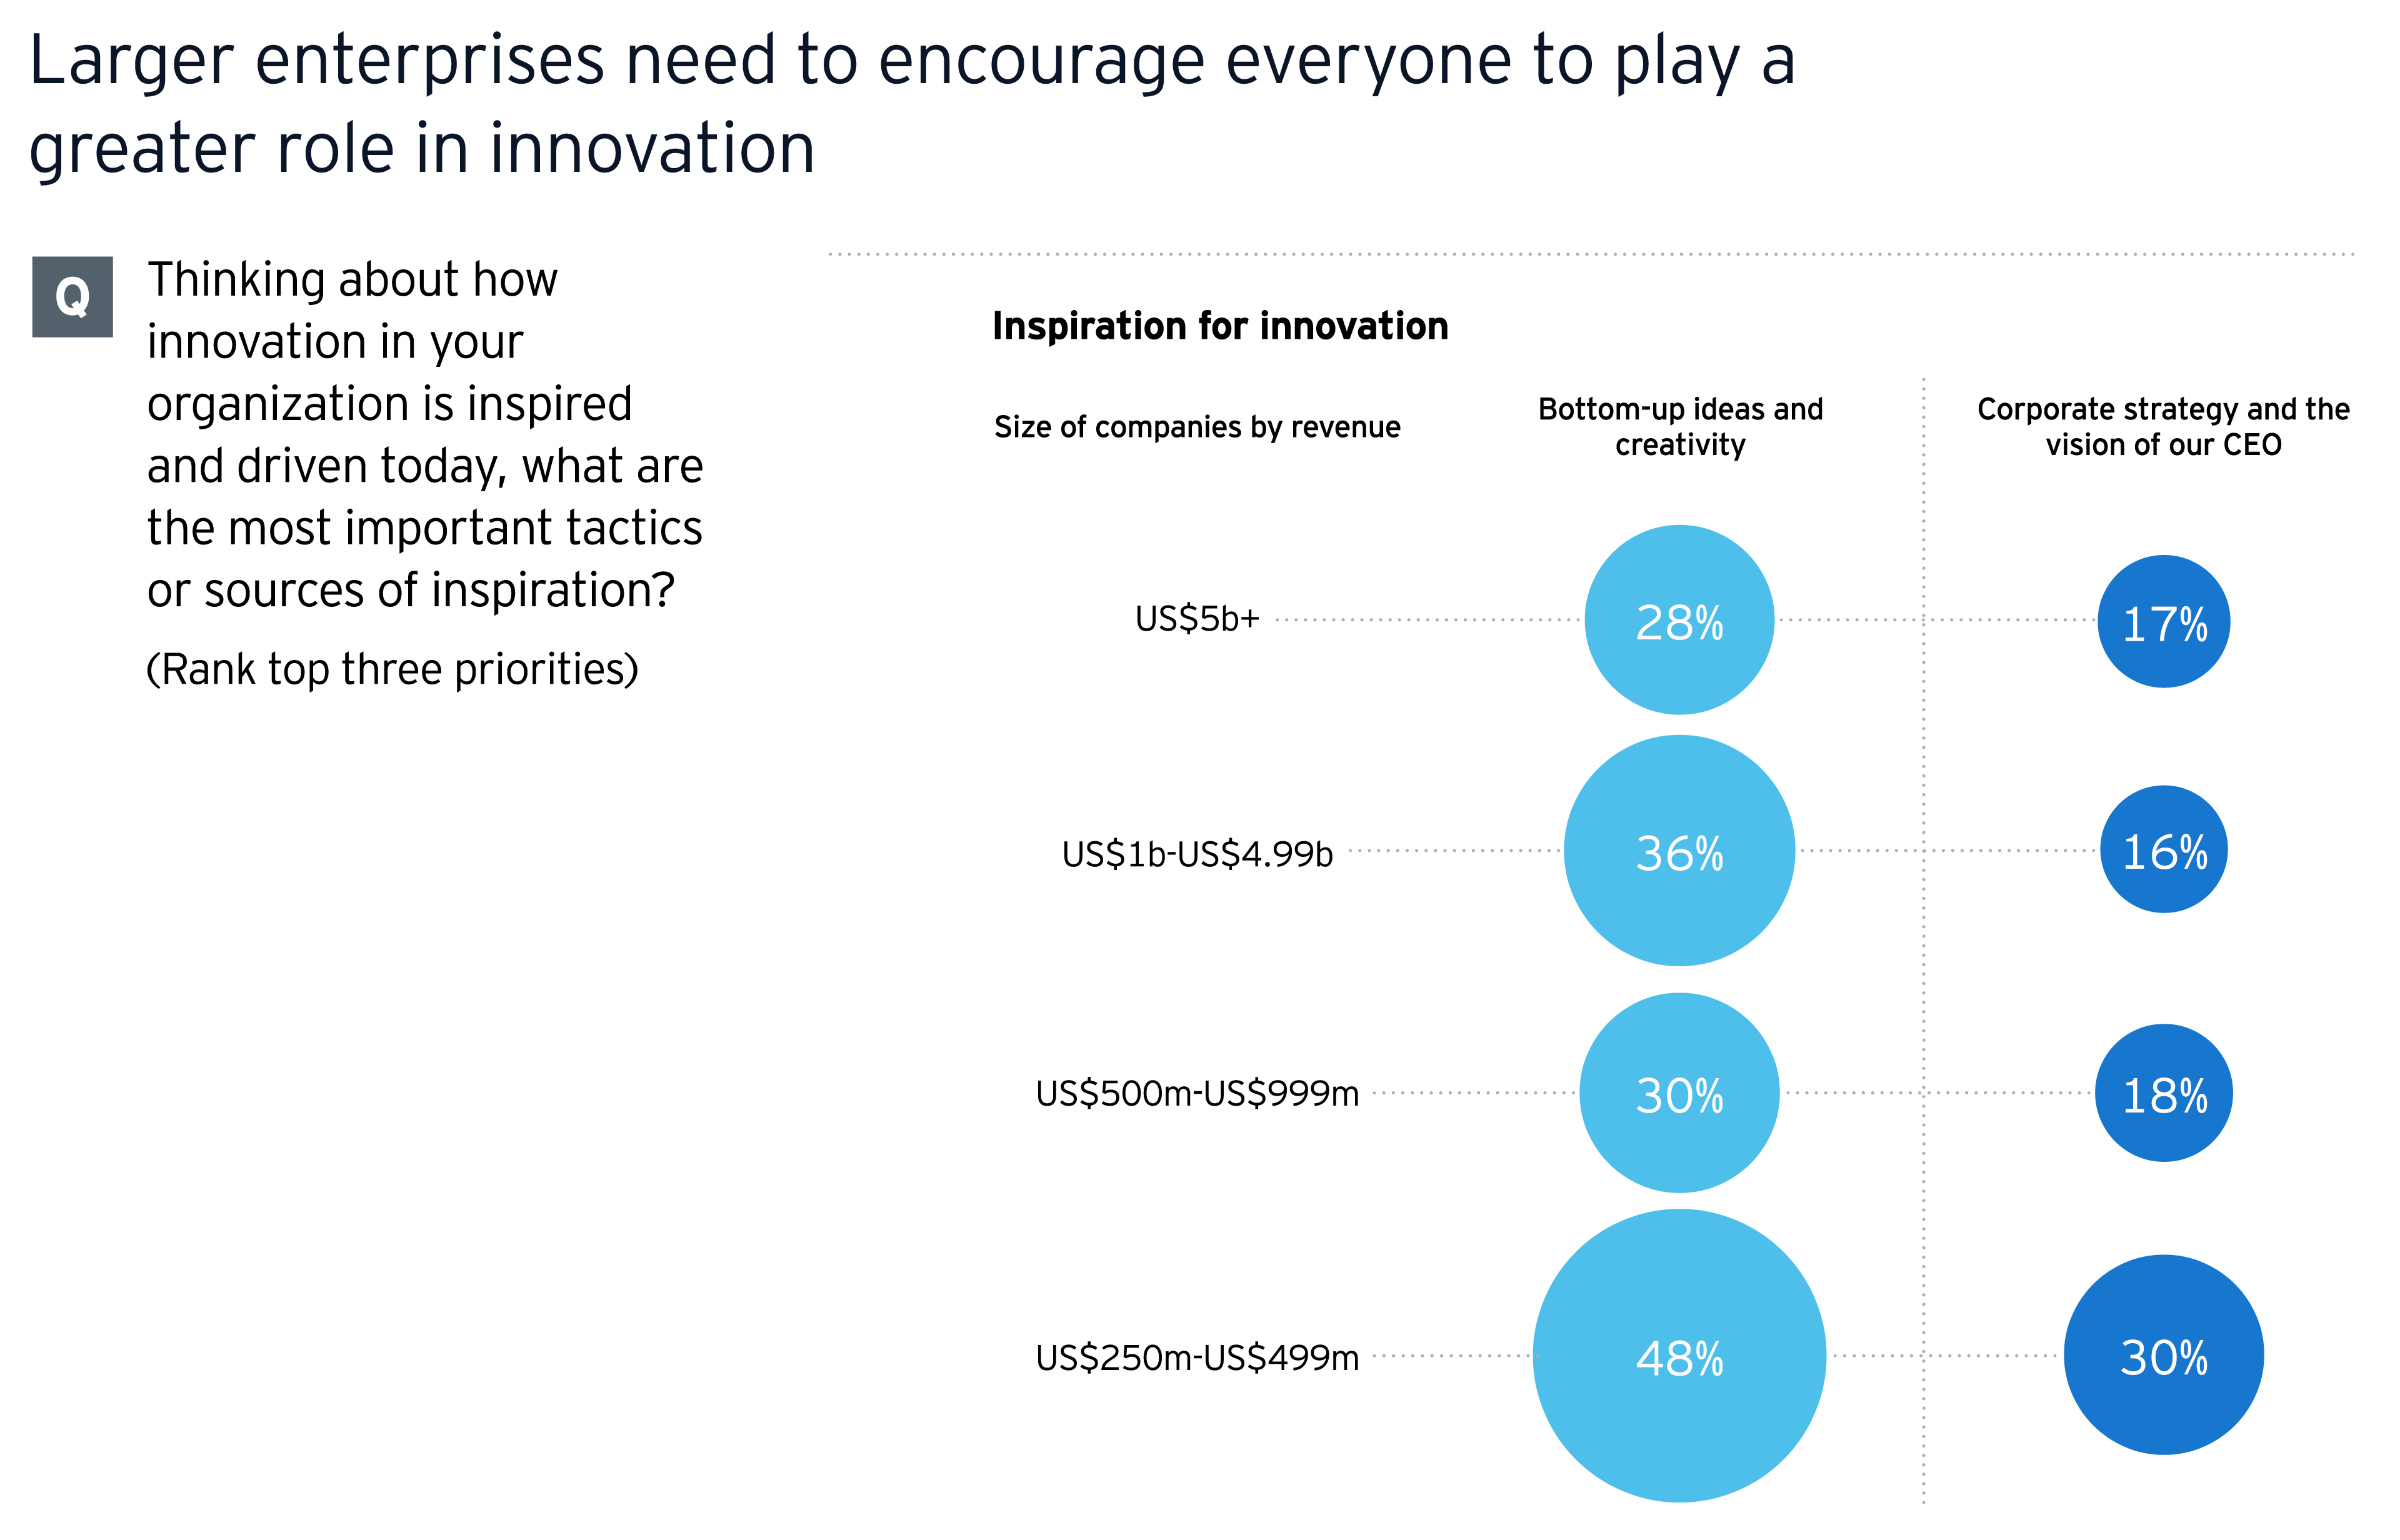 Larger enterprises need to encourage everyone to play a greater role in innovation